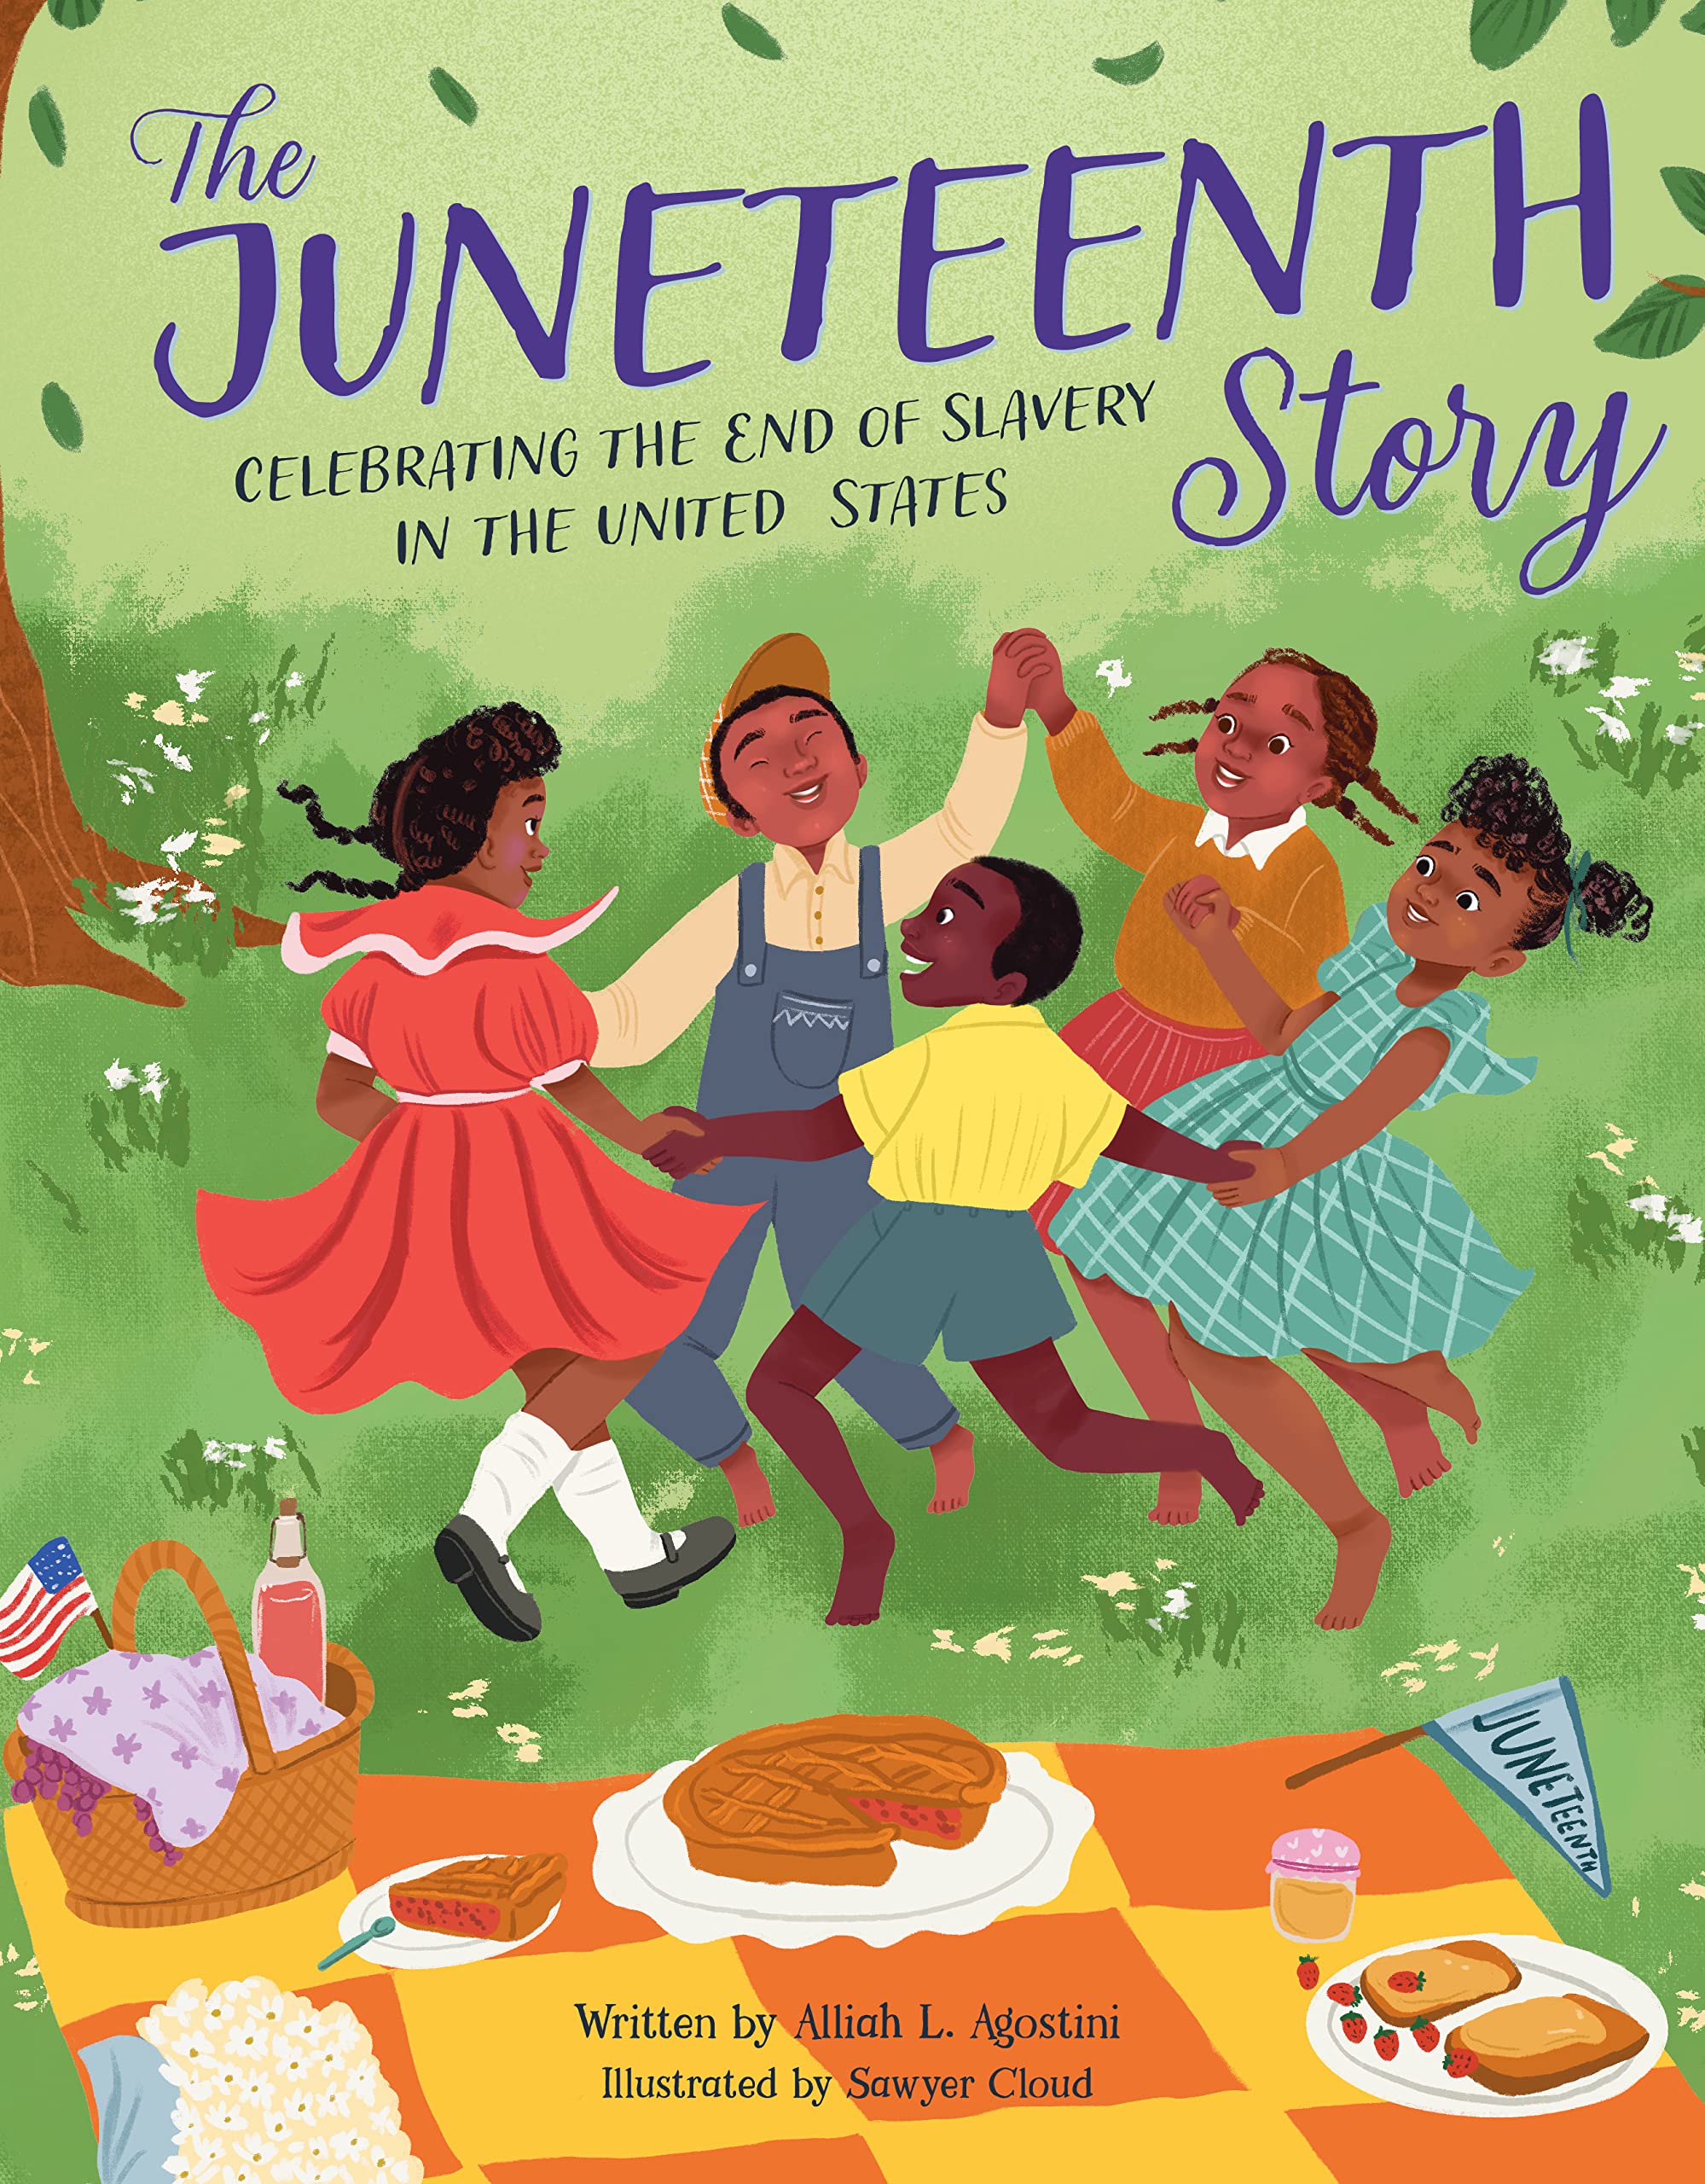 Cover of The Juneteenth Story by Agostini